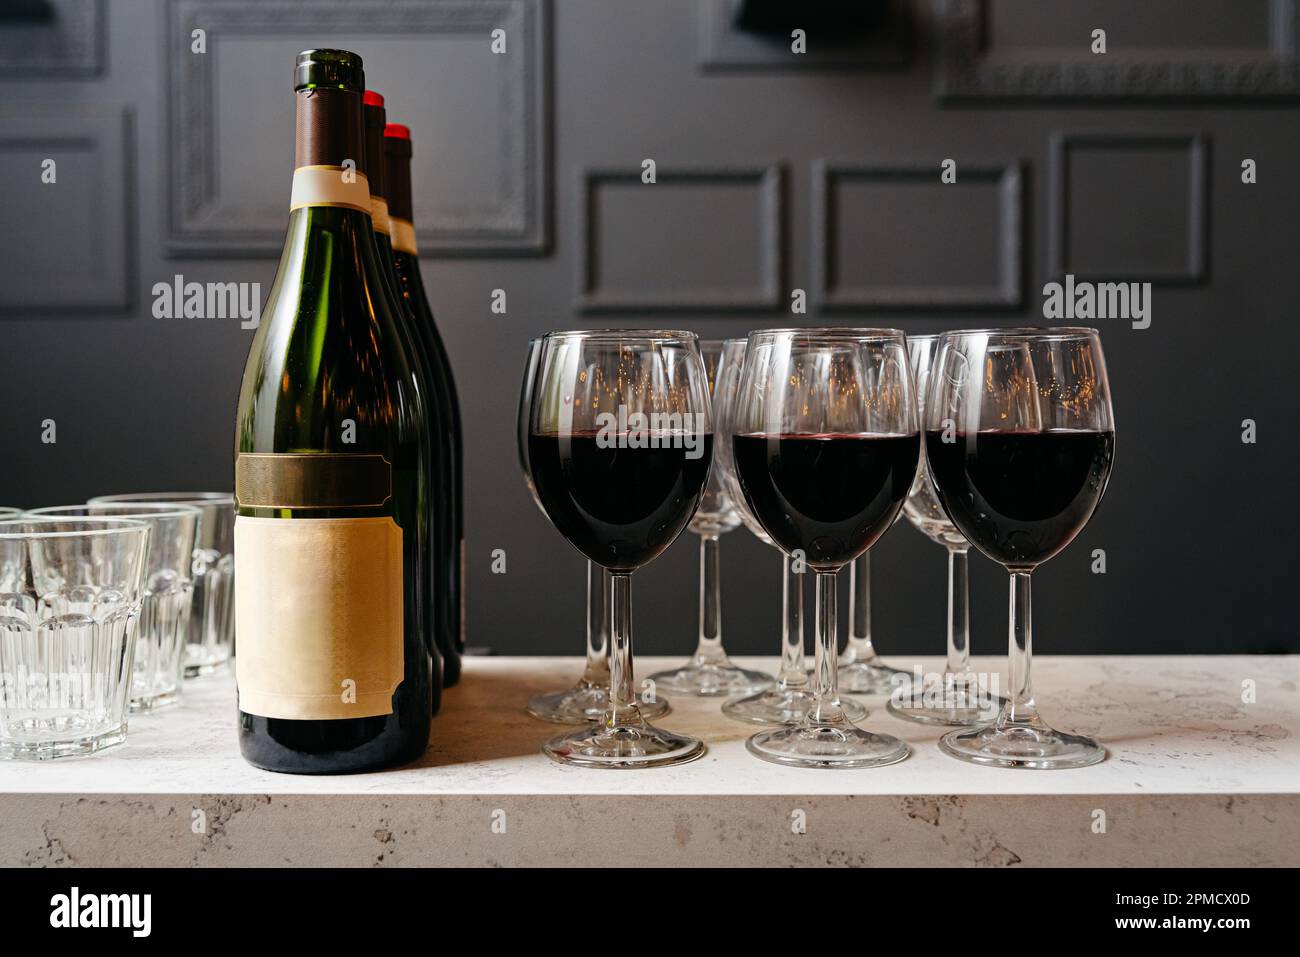 Bottle of red wine and glasses on the bar in the restaurant. Marble bar counter and black walls. Stock Photo